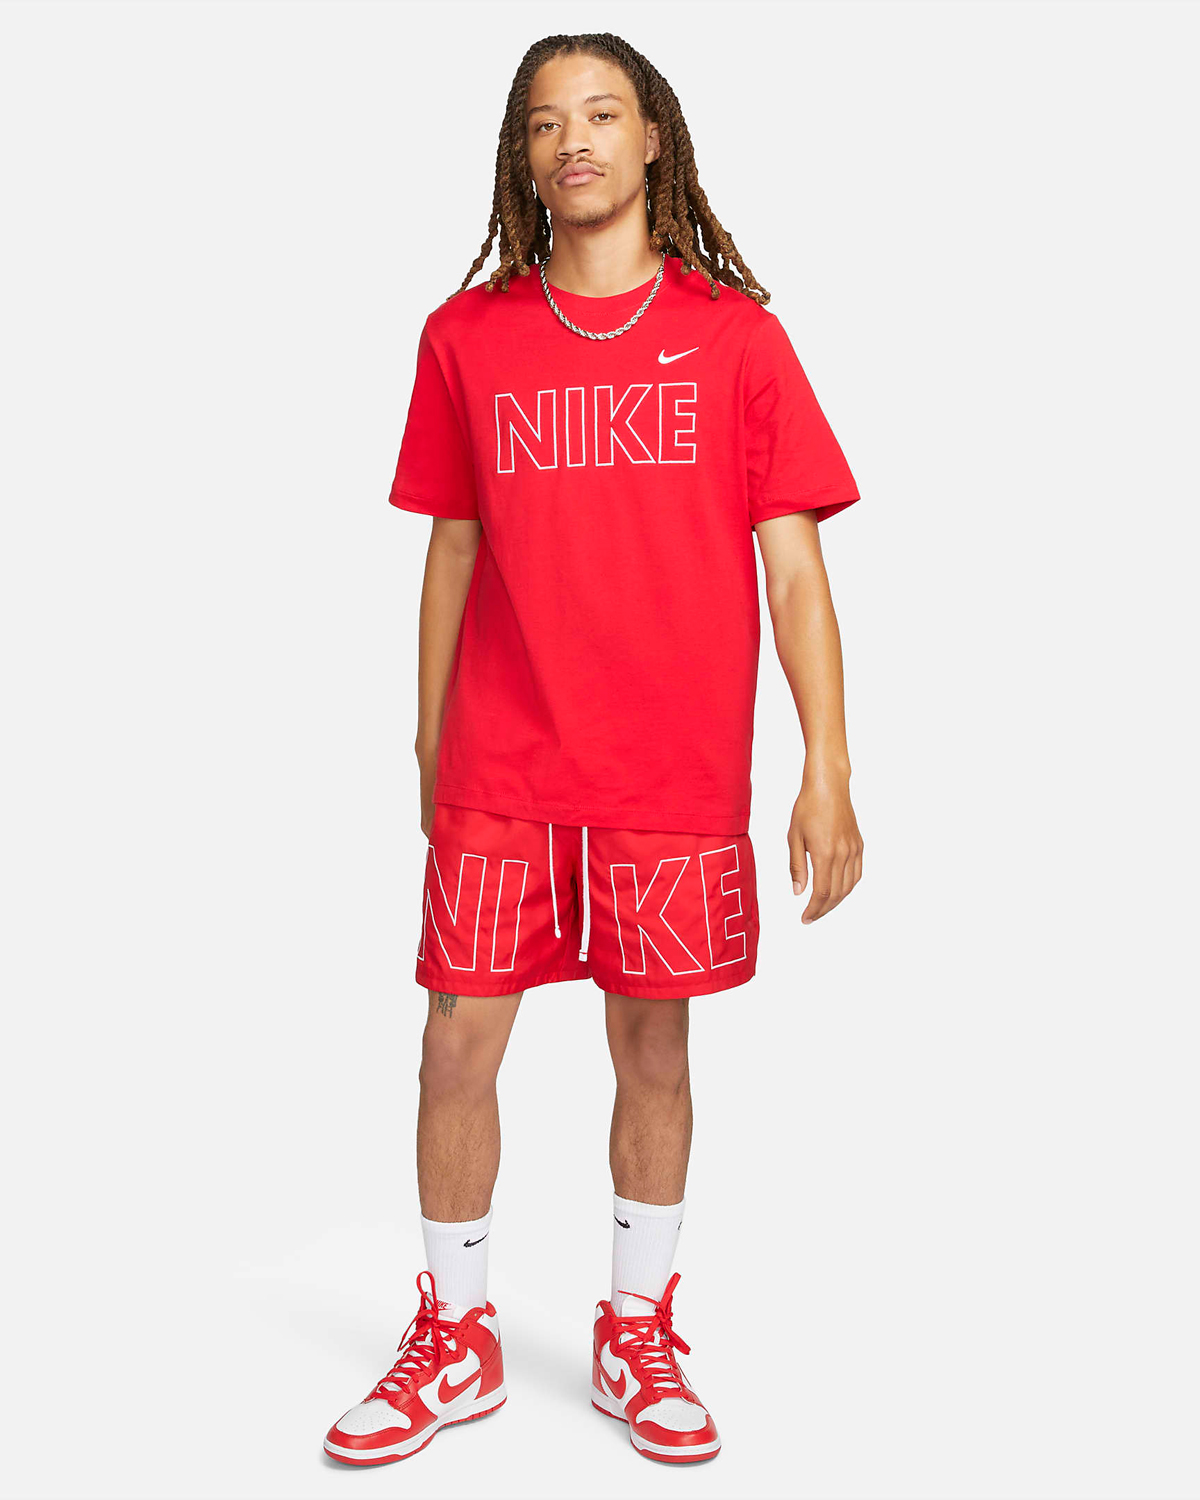 Nike-Sportswear-Graphic-T-Shirt-and-Shorts-University-Red-Outfit